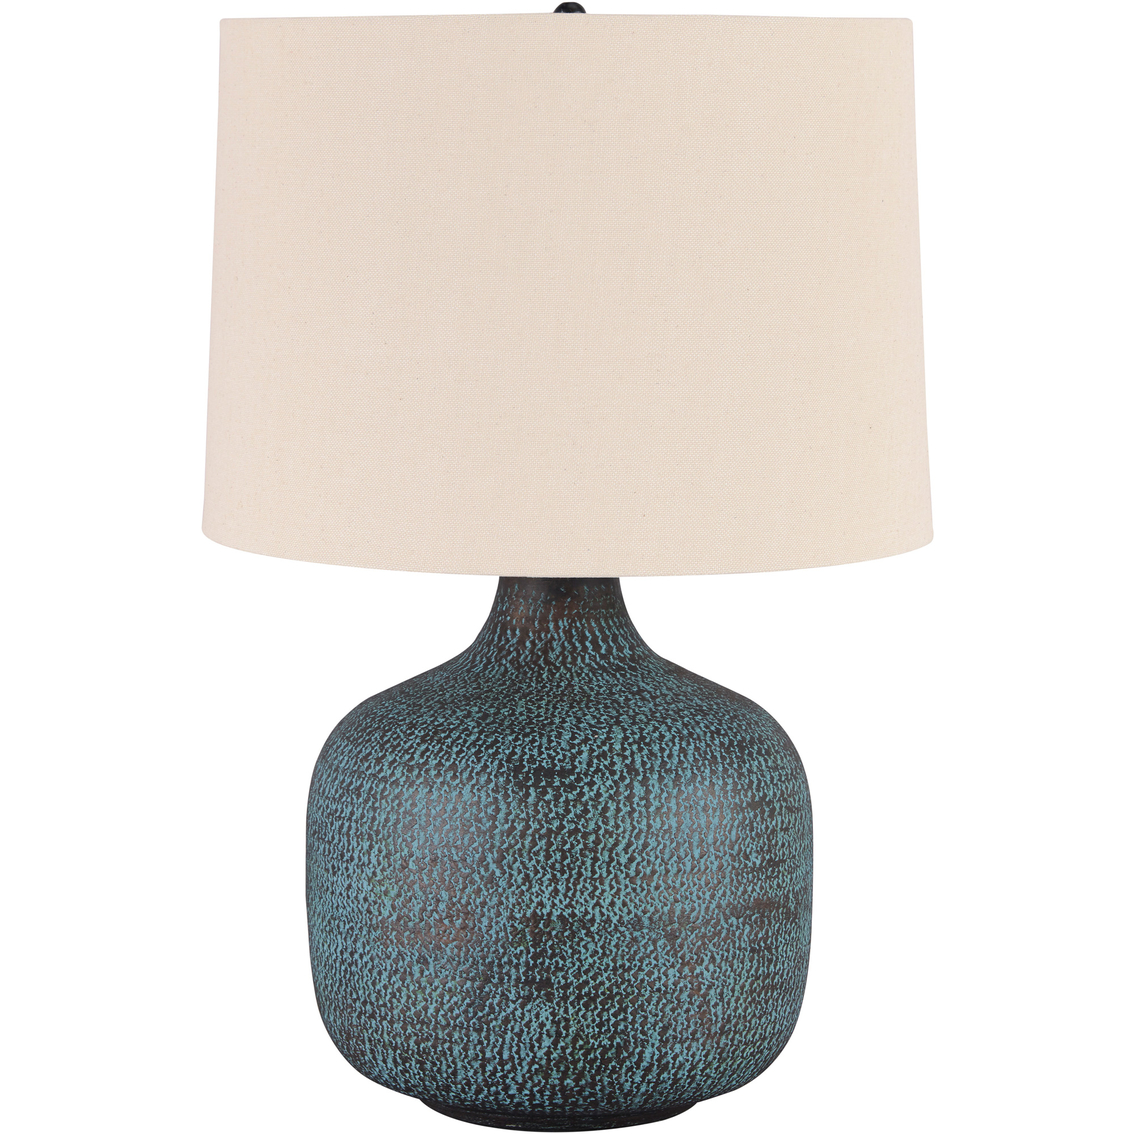 Signature Design by Ashley Malthace 23.75 in. Metal Table Lamp - Image 2 of 3